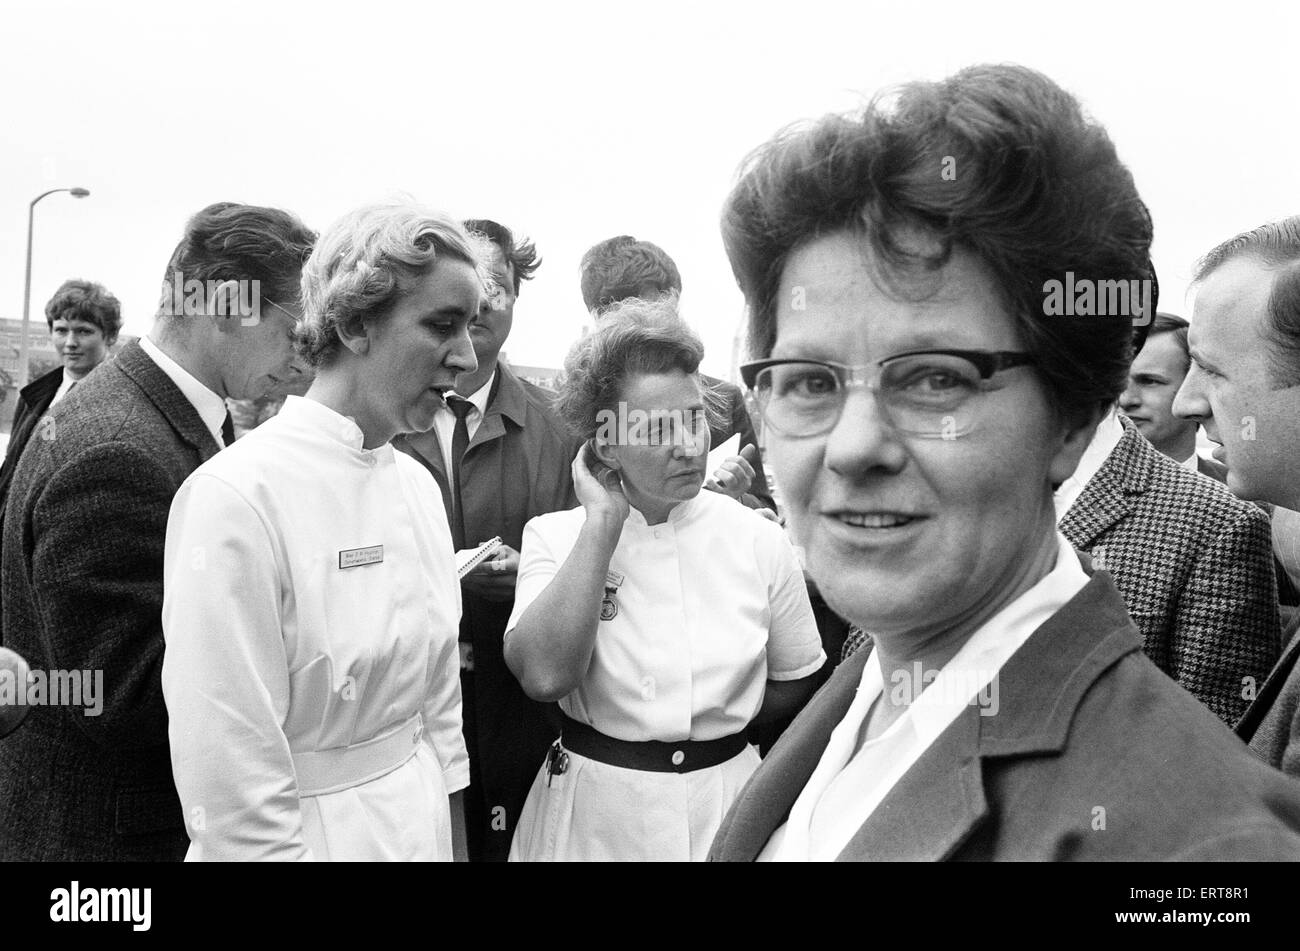 Principle Nursing Officer, Mrs Telford, at Birmingham Maternity Hospital, where It was reported earlier yesterday, 2nd October 1968, that Sheila Thorns from Birmingham underwent a Caesarean section early this morning during which six children - four boys and two girls - were delivered. In what was been hailed as the first recorded case of live sextuplets in Britain. All the babies were placed in incubators after being delivered. Twenty eight medical staff from Birmingham Maternity Hospital were present at the delivery. Three of the Thorns sextuplets survived, July, Susan & Roger, and went on t Stock Photo